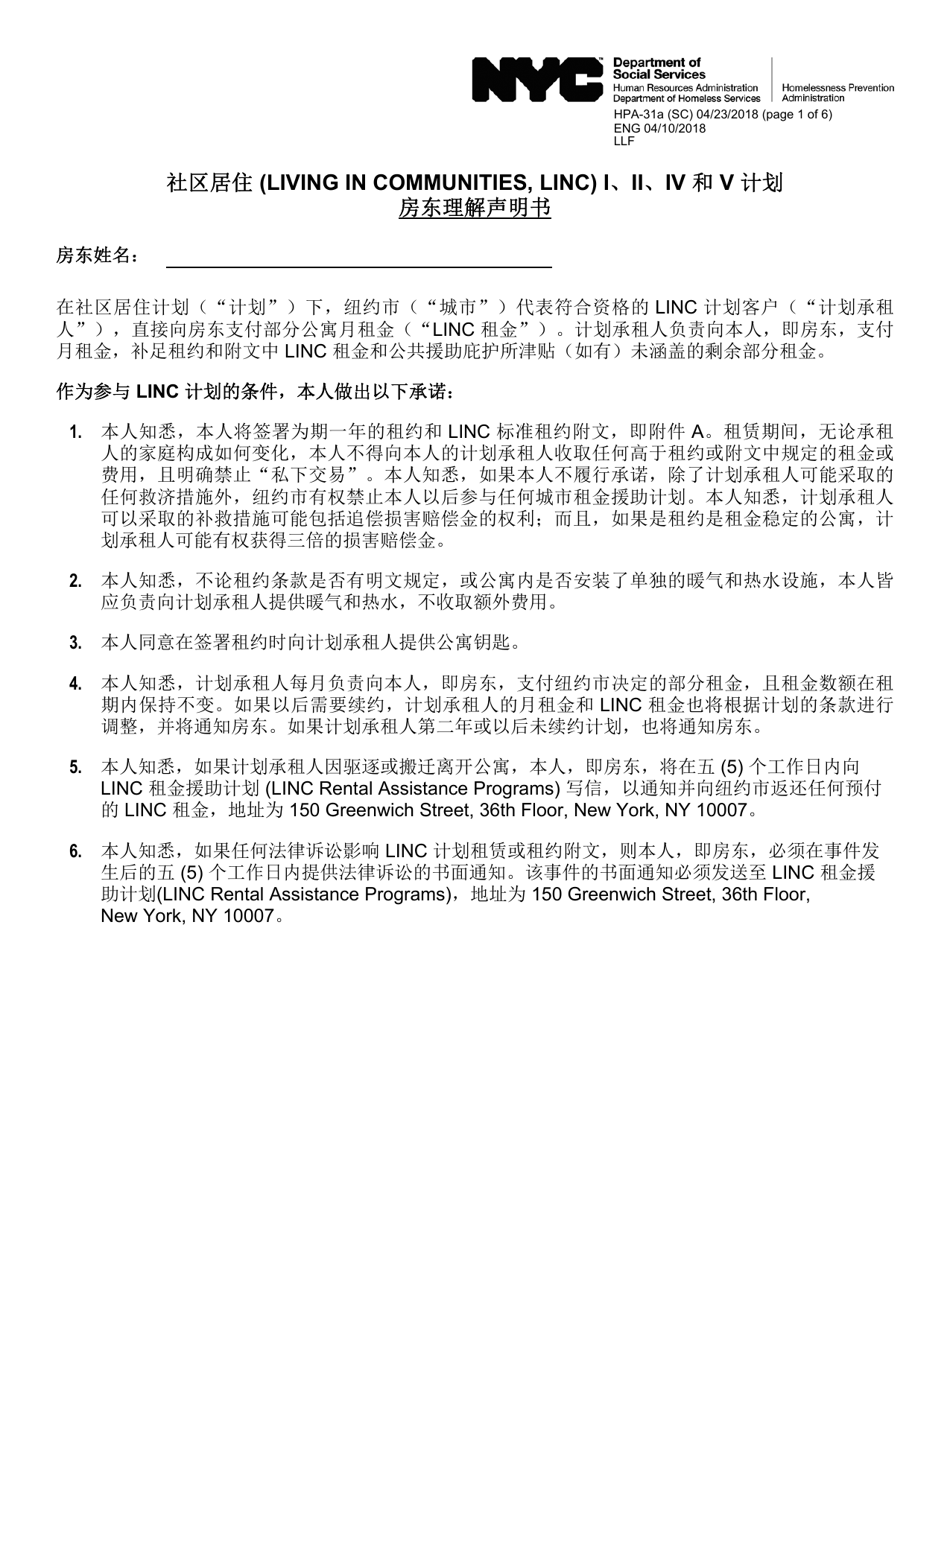 Form HPA-31A (SC) Living in Communities (Linc) I, II, IV, and V Programs Landlord Statement of Understanding - New York City (Chinese Simplified), Page 1